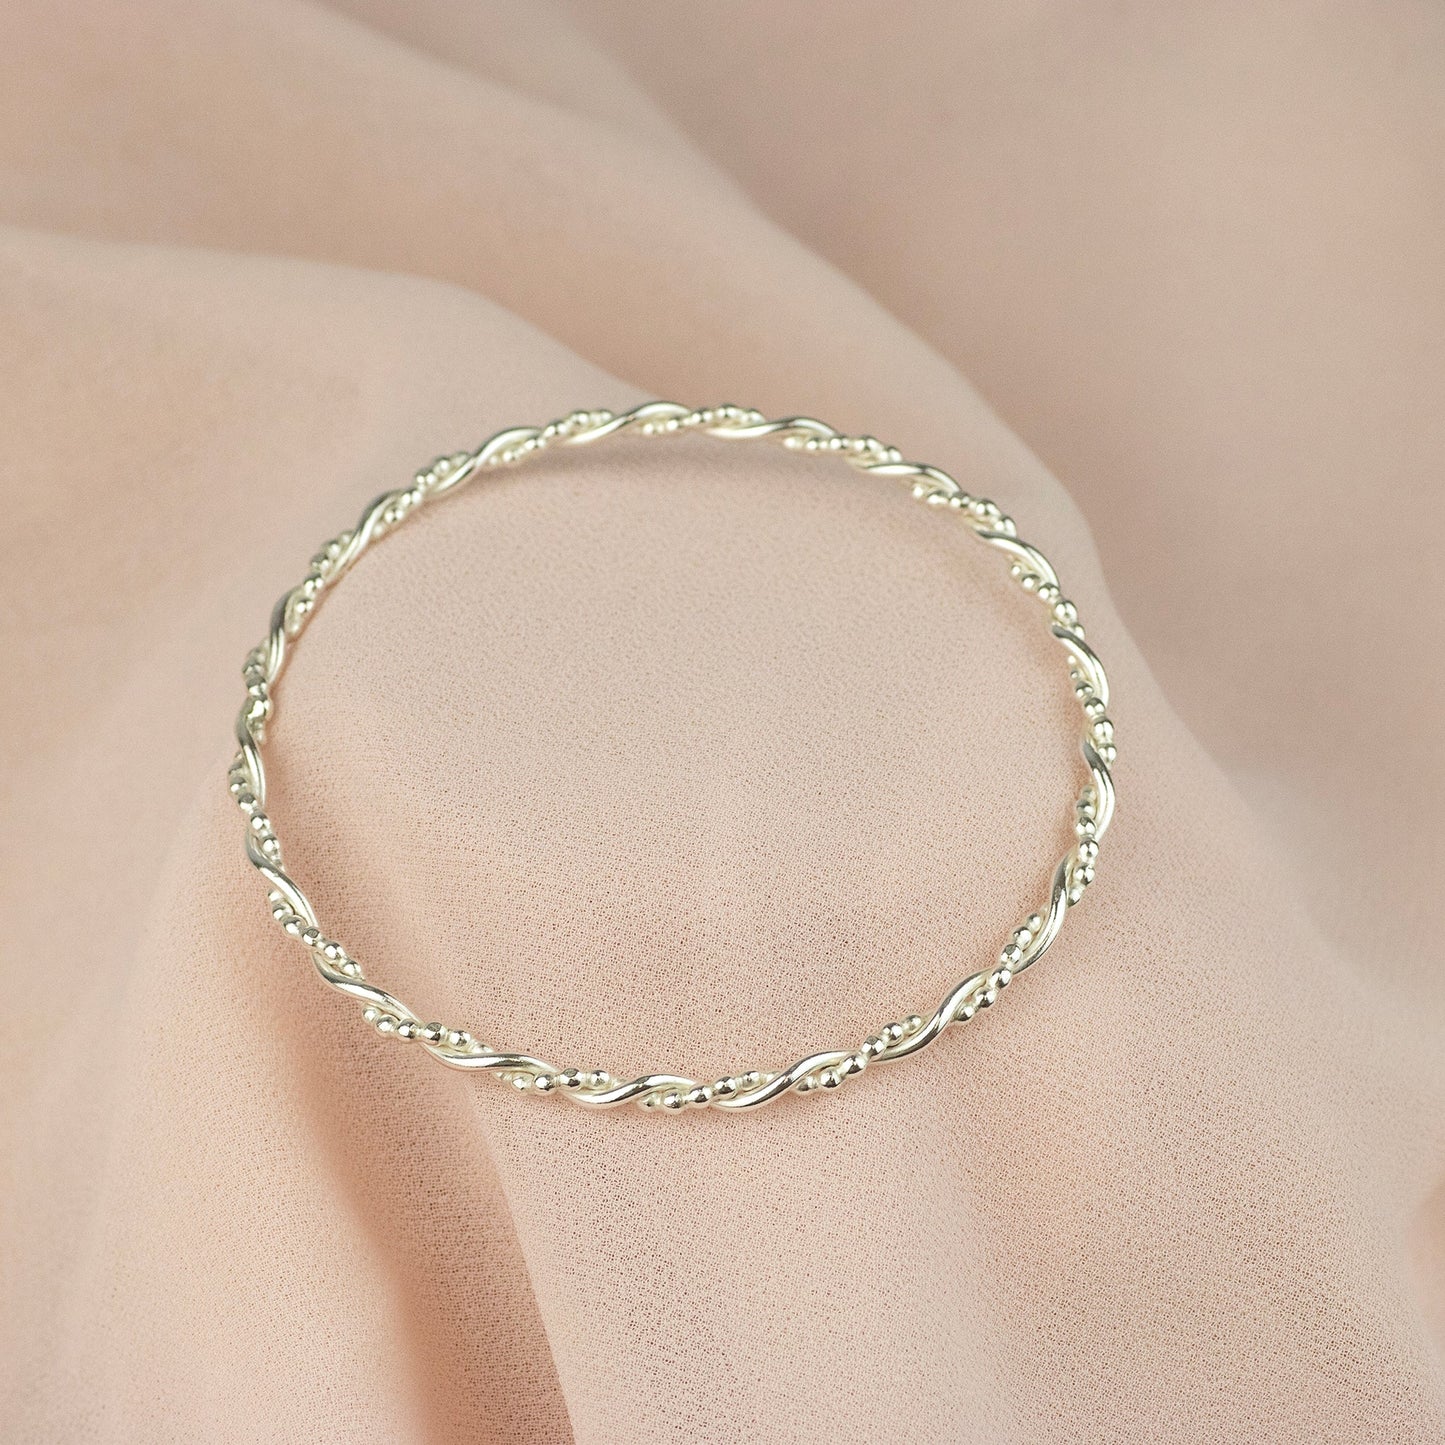 Anniversary Gift - Entwined Bangle - Linked for a Lifetime